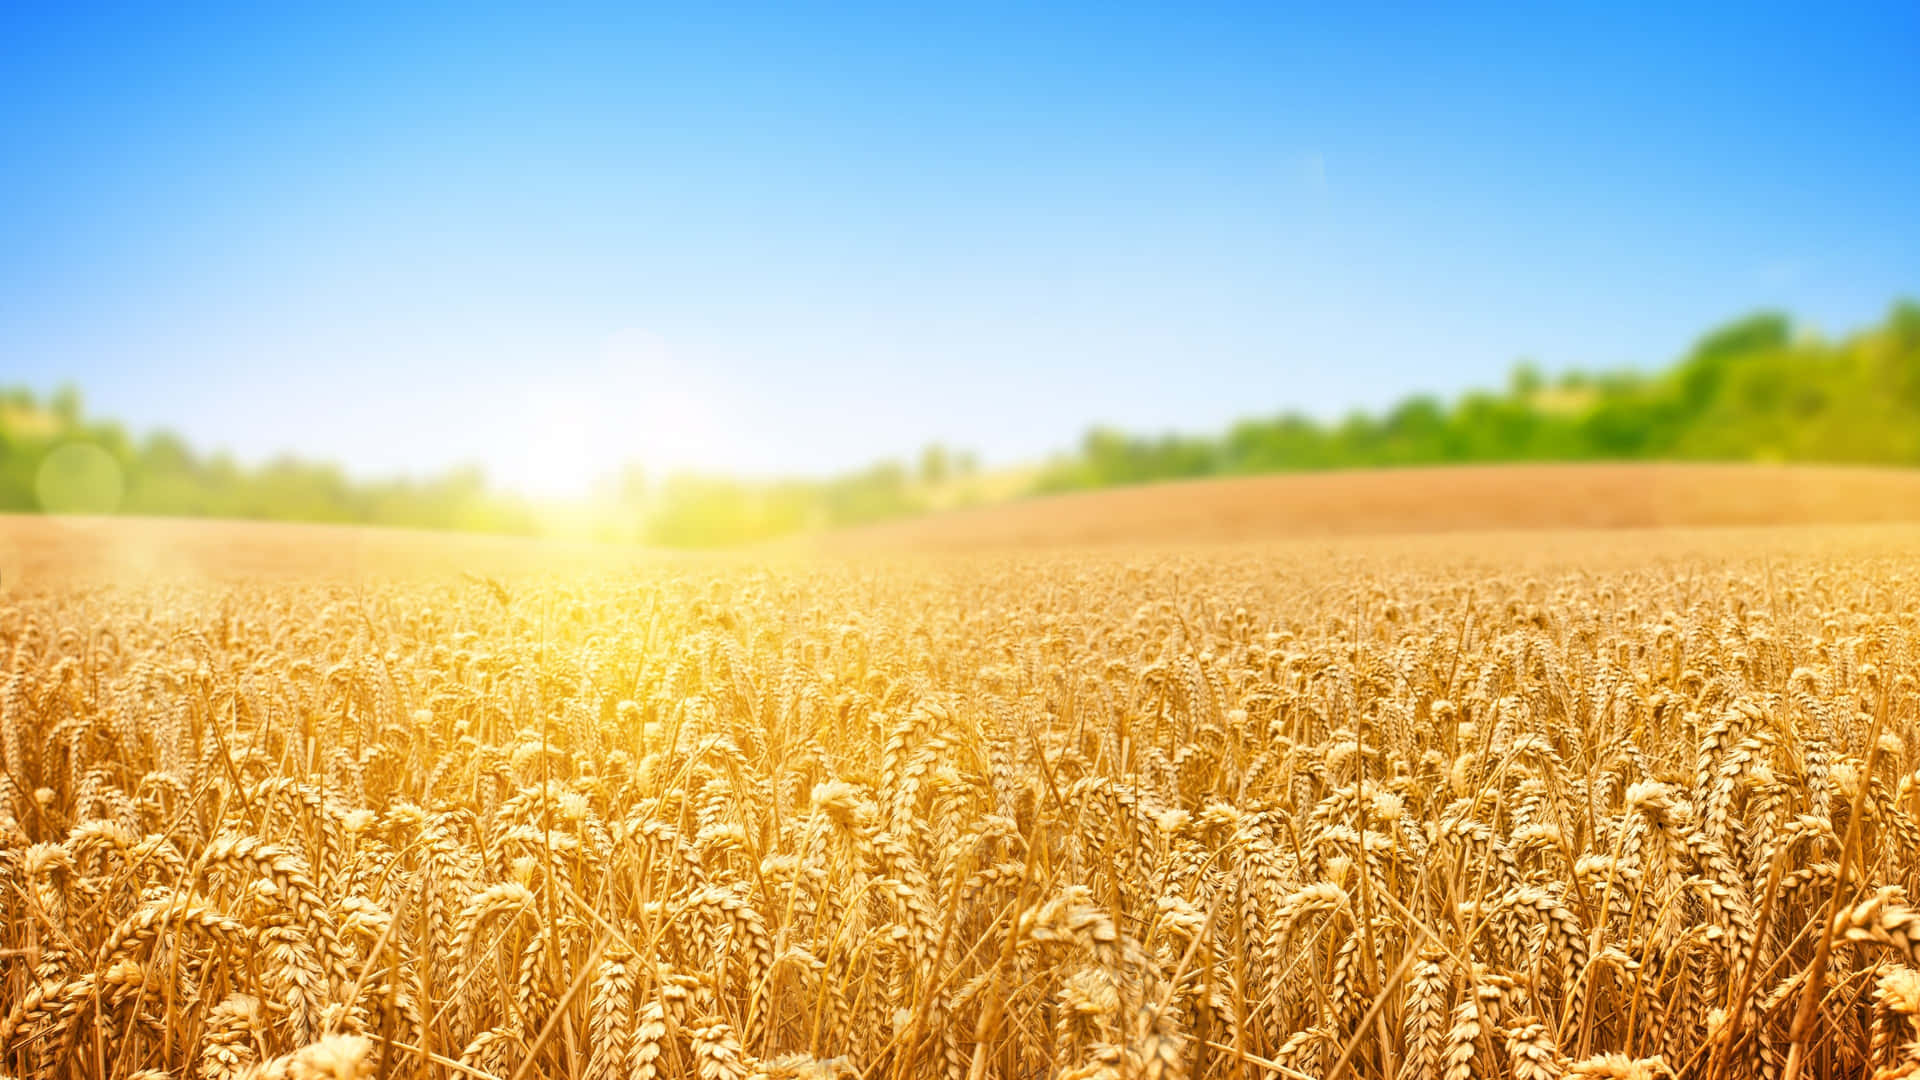 A Wheat Field With The Sun Shining On It